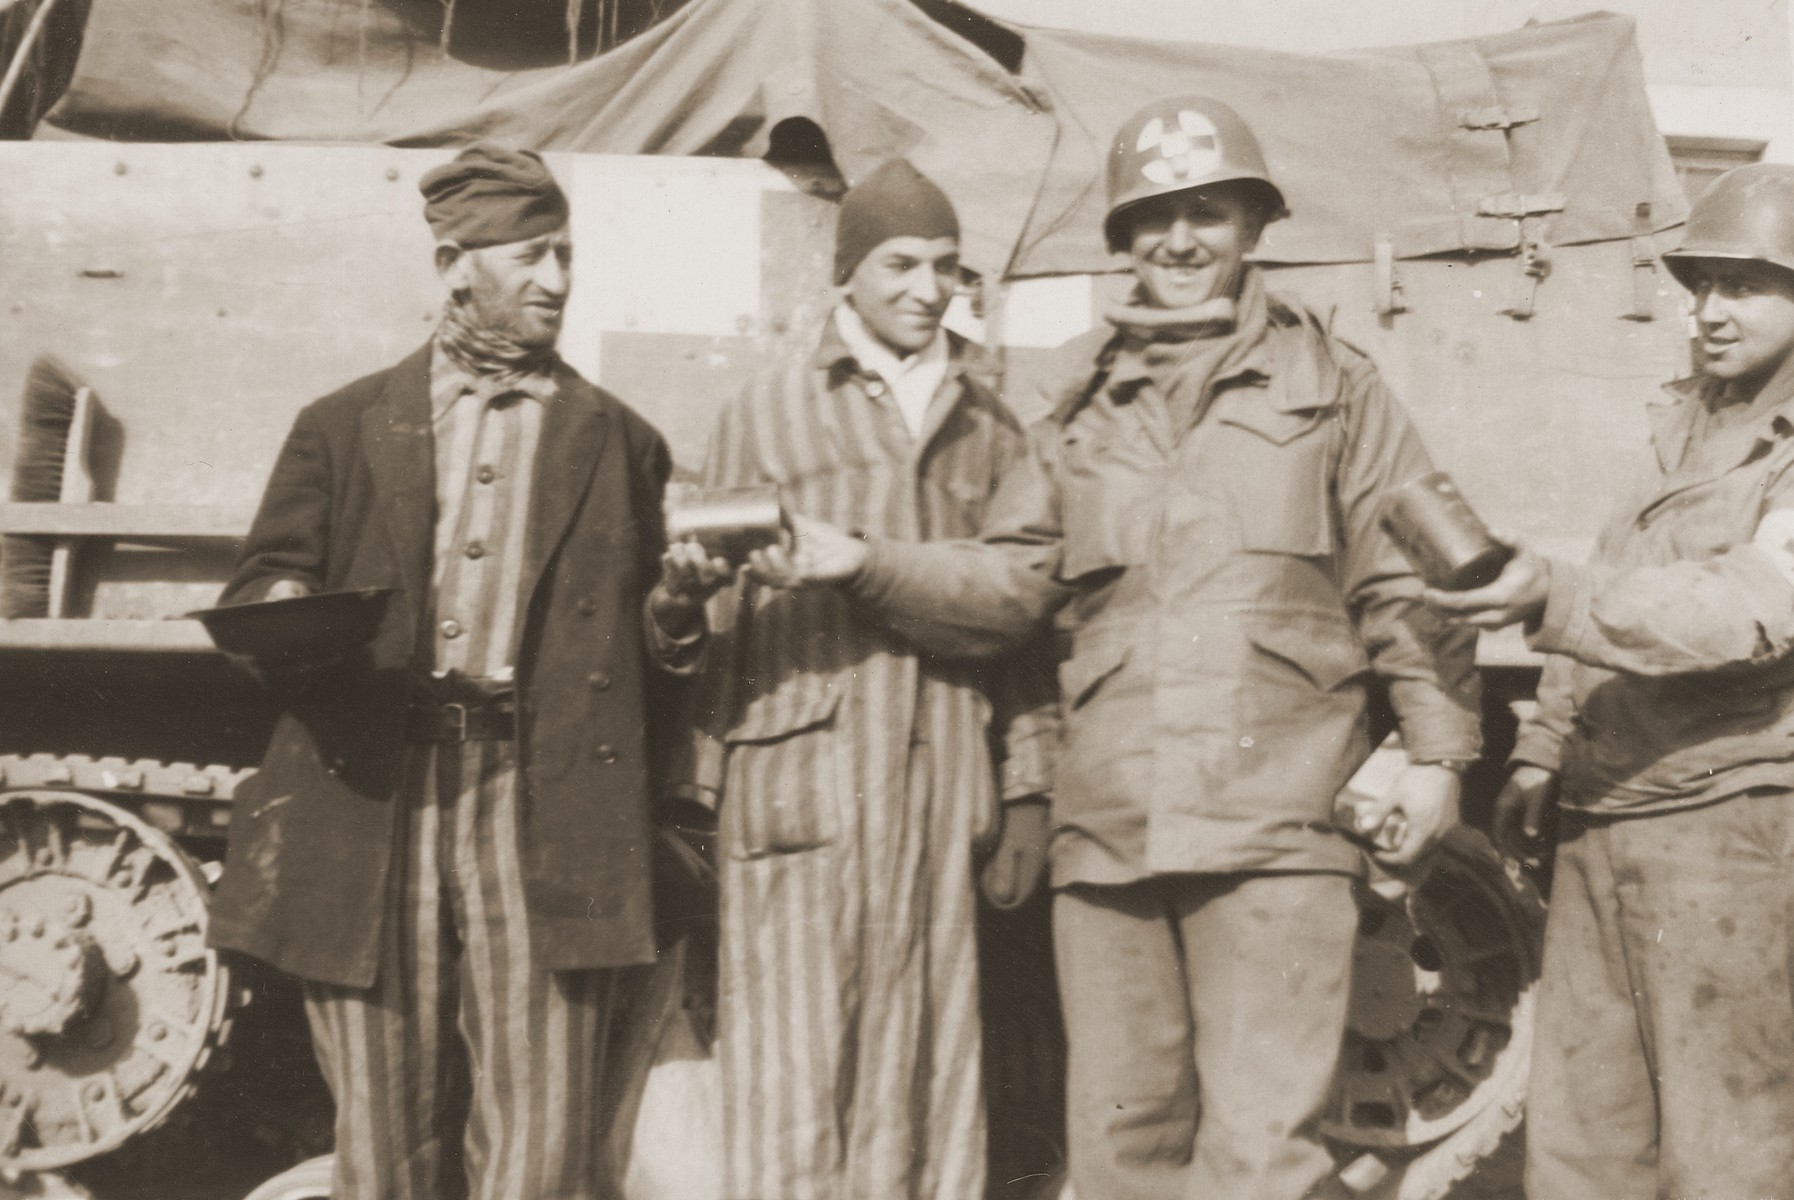 U.S. Army medical personnel with the 10th Armored Division distribute food to two survivors liberated from a concentration camp.  

The man in the center is Technical Sergeant George Delmonica.